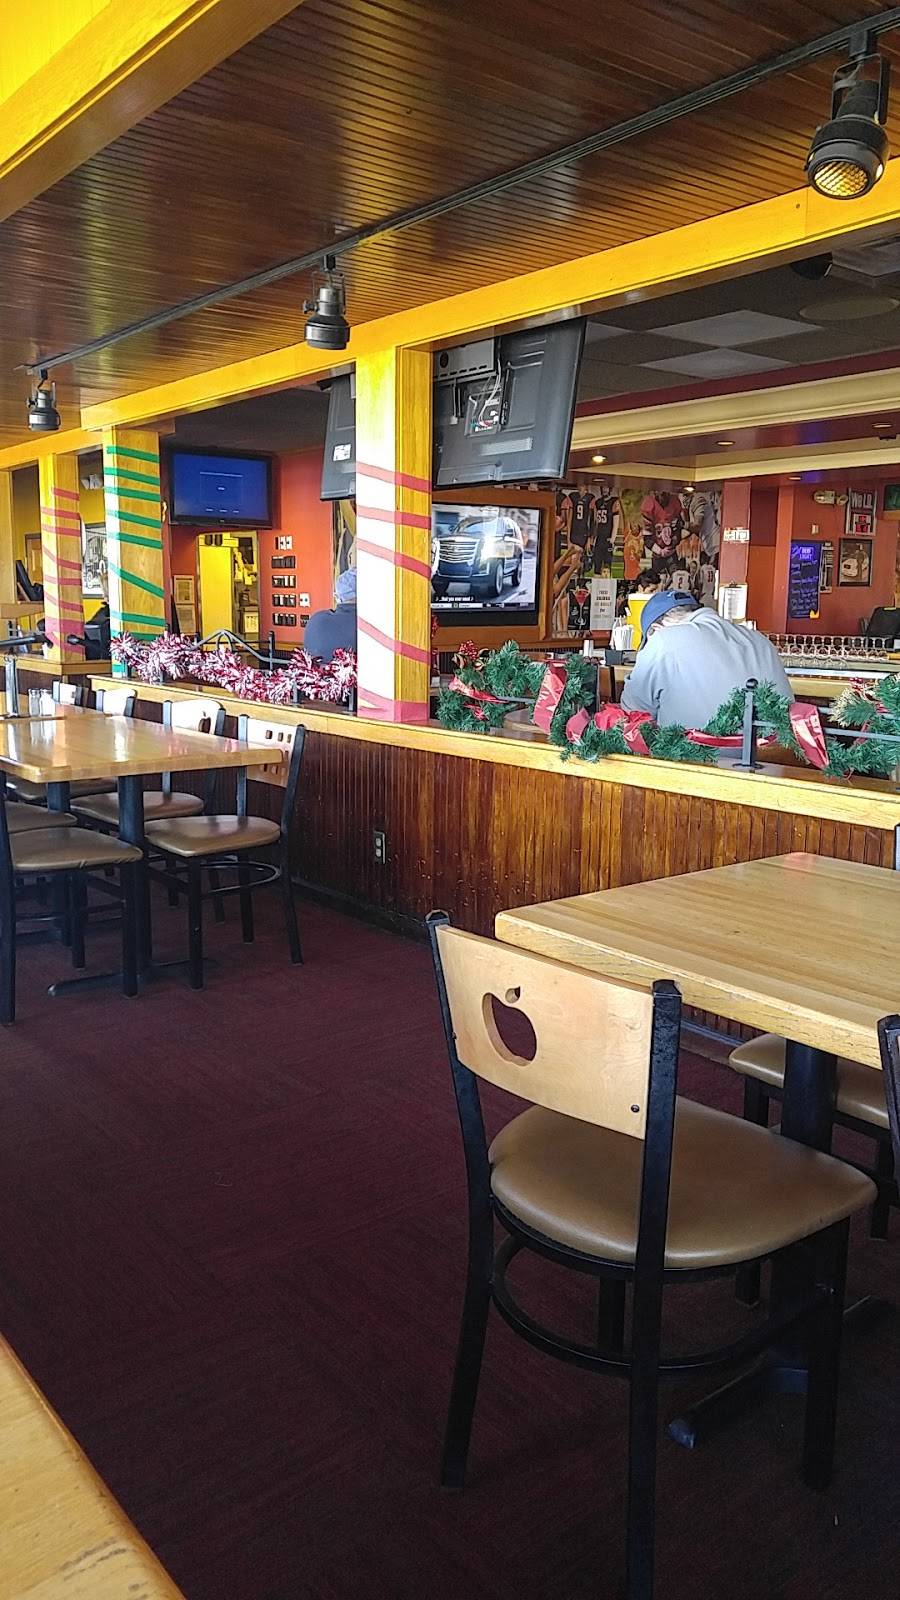 Applebees Grill + Bar | restaurant | 202 S Broadview St, Cape Girardeau, MO 63703, USA | 5733346830 OR +1 573-334-6830